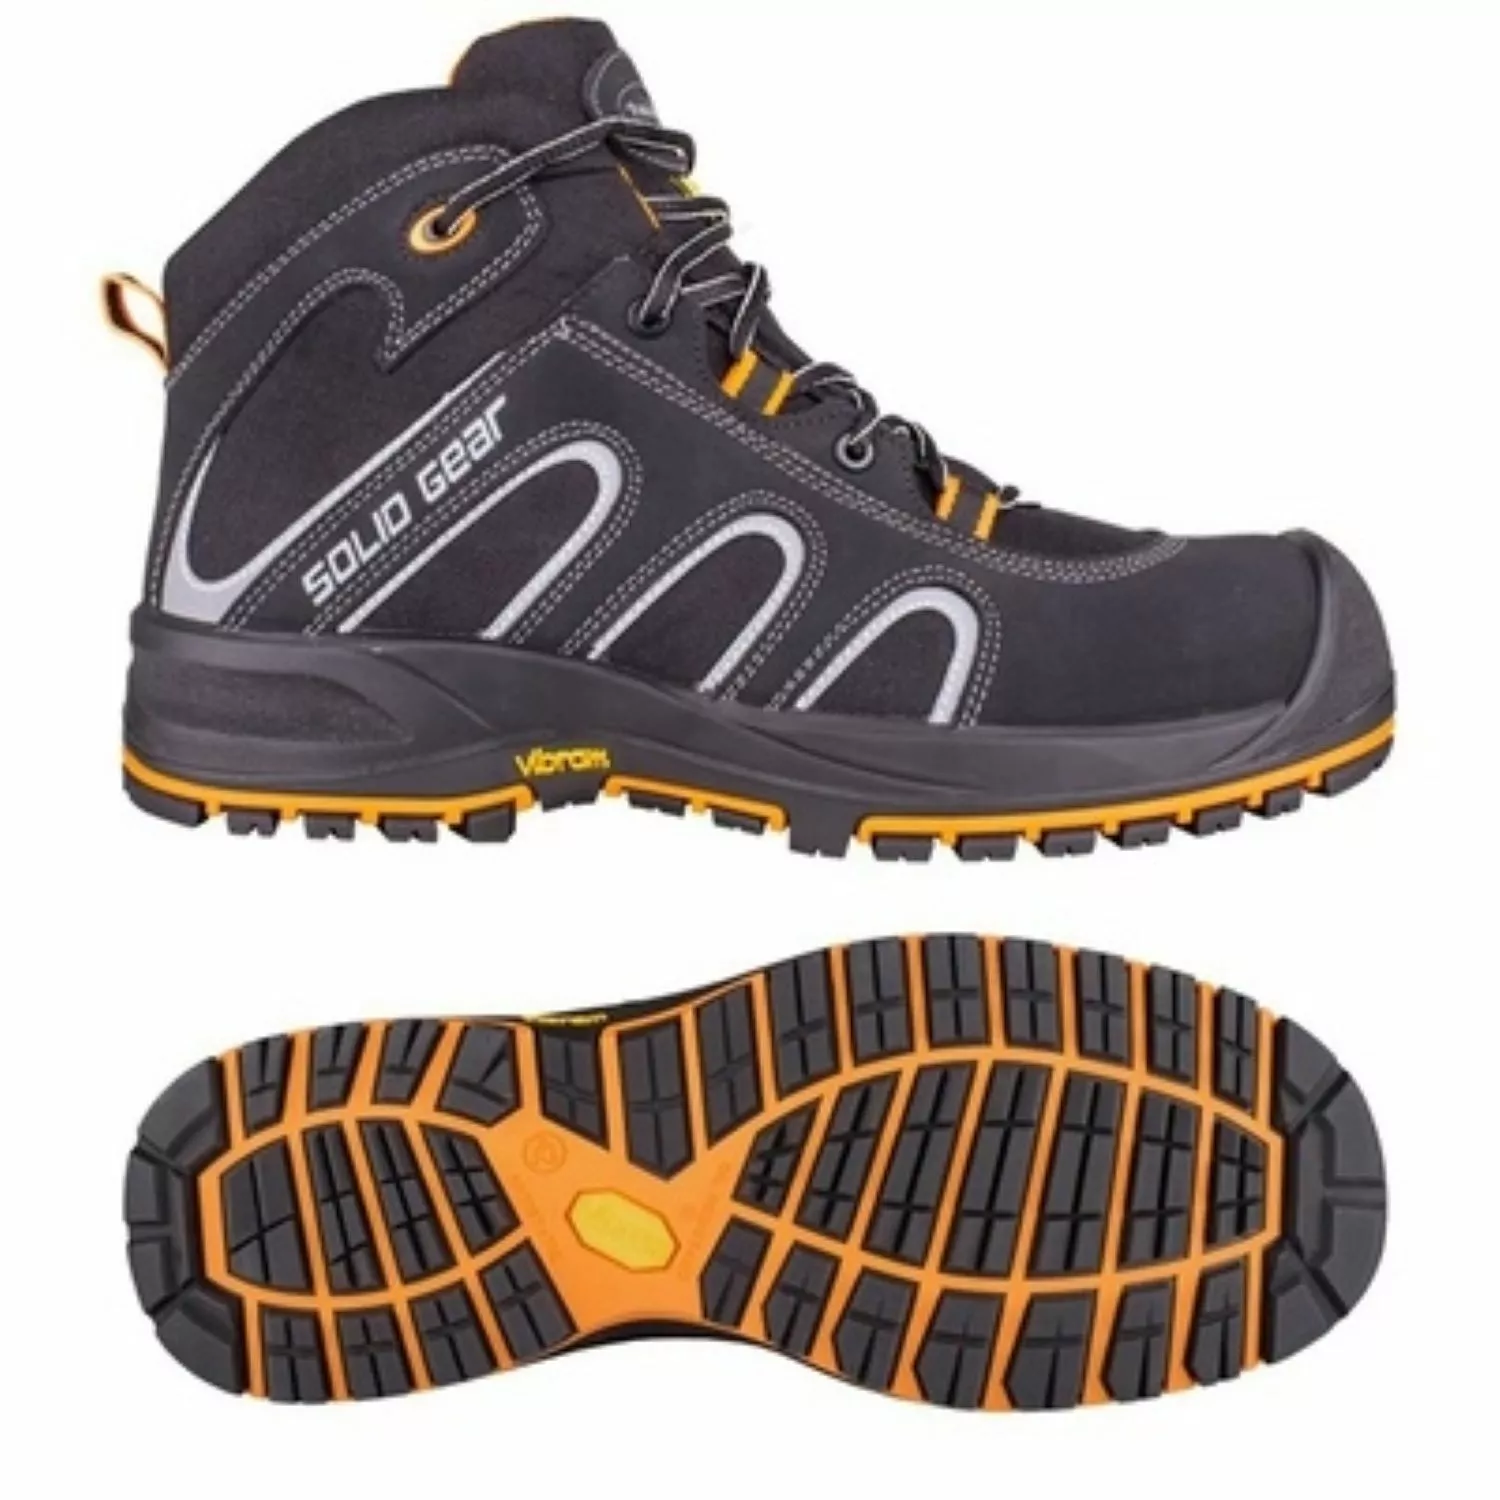 Solid Gear 73002 Falcon chaussure de travail - taille 42